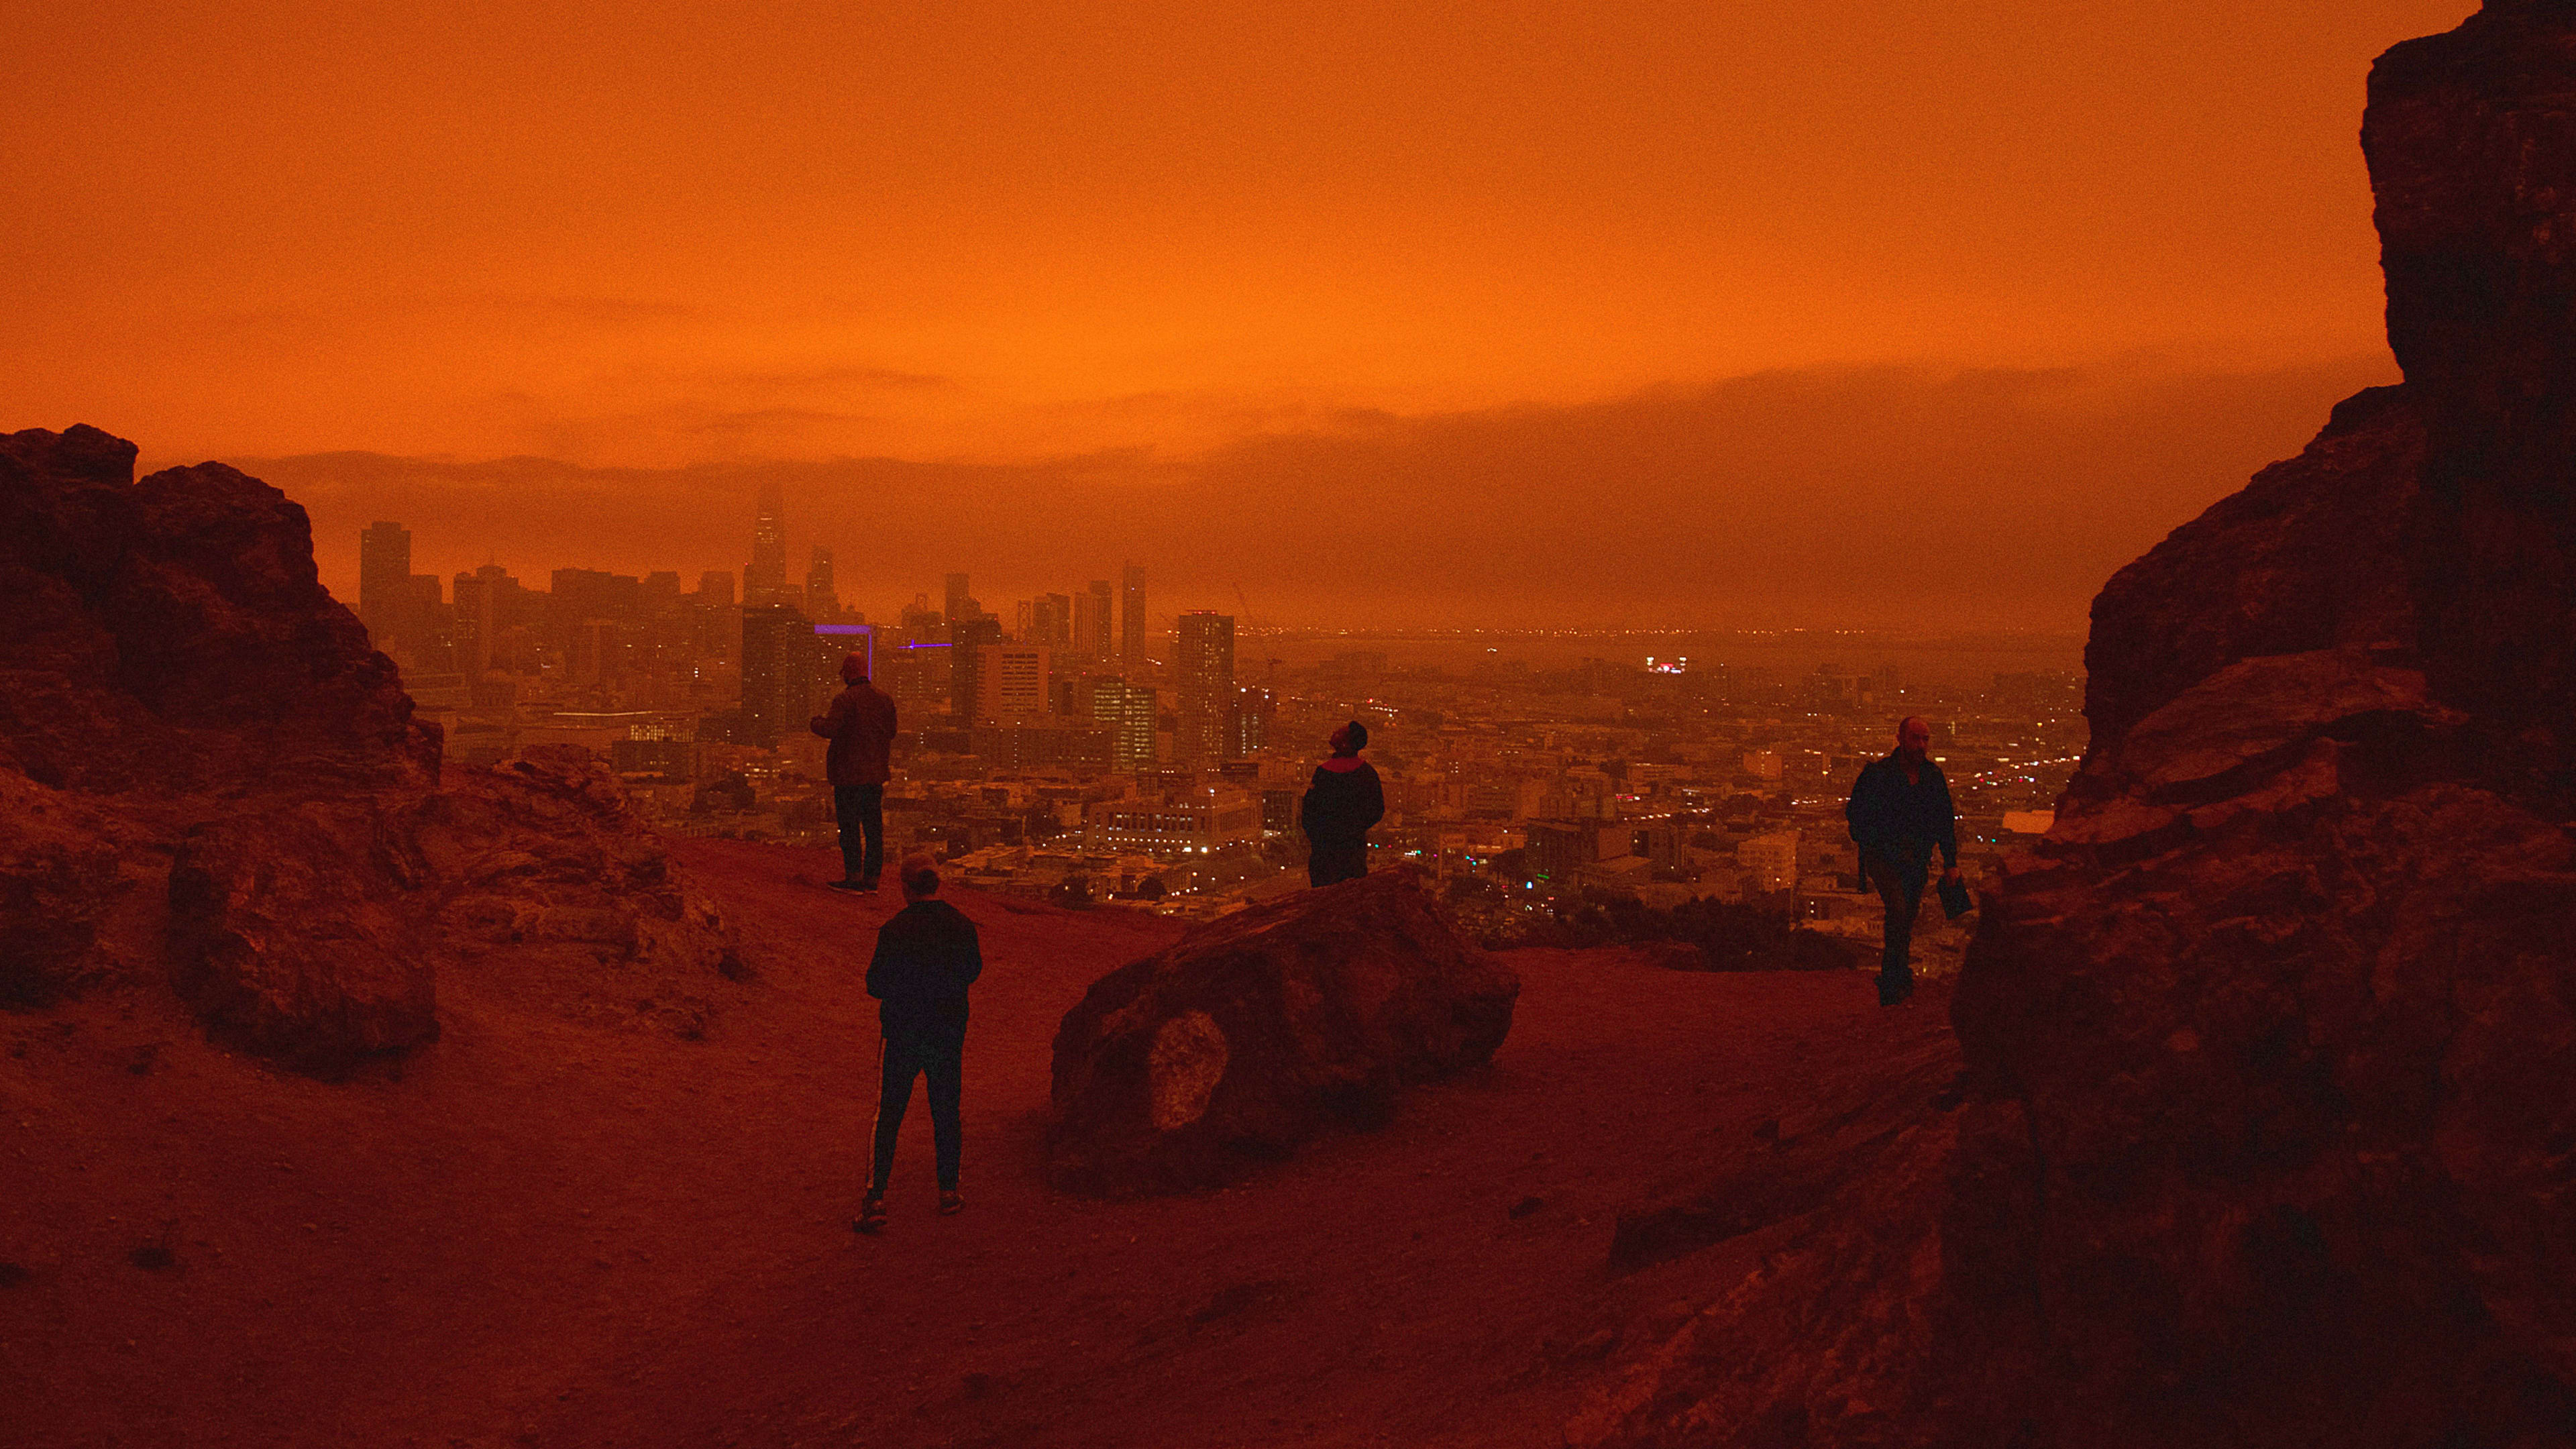 Why the West Coast’s orange sky was so unsettling, according to color theory